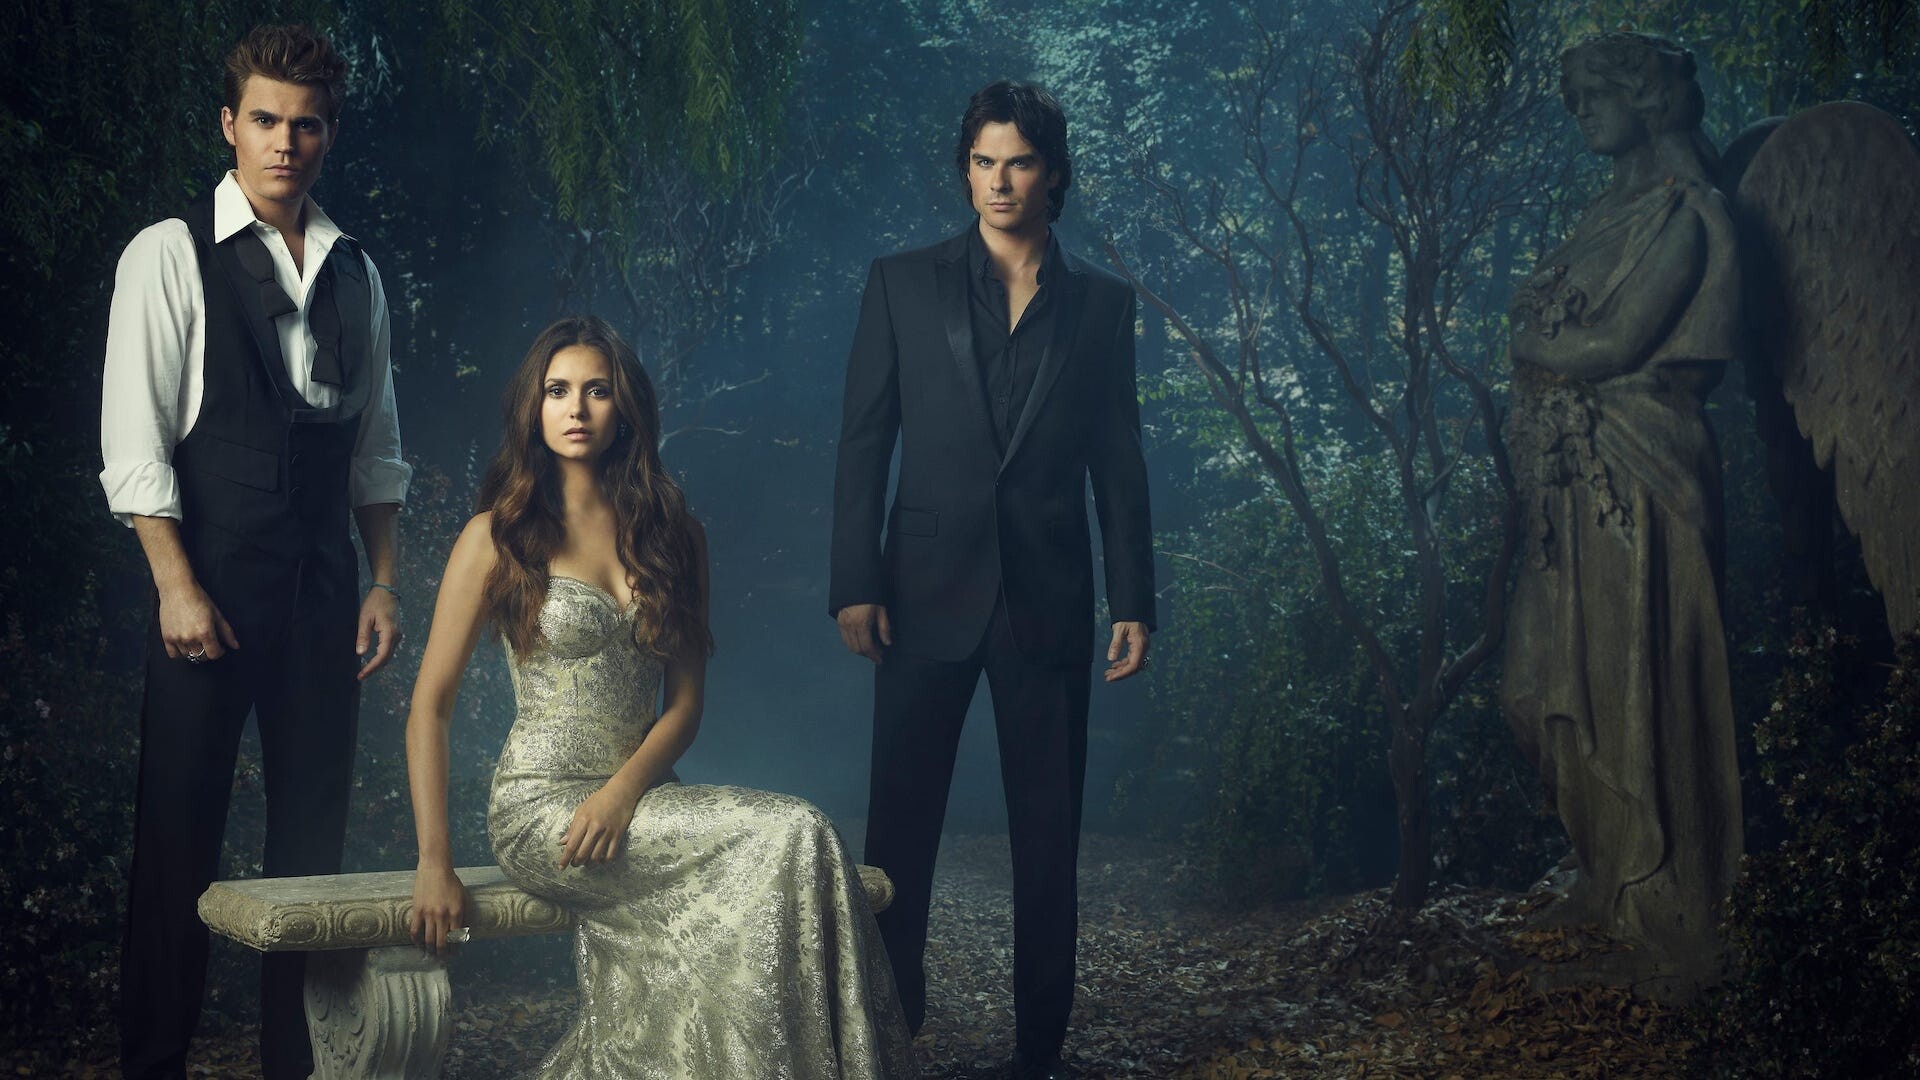 The Vampire Diaries (TV Series): Main Characters Trio, Graveyard In The Town Charged With Supernatural History. 1920x1080 Full HD Background.